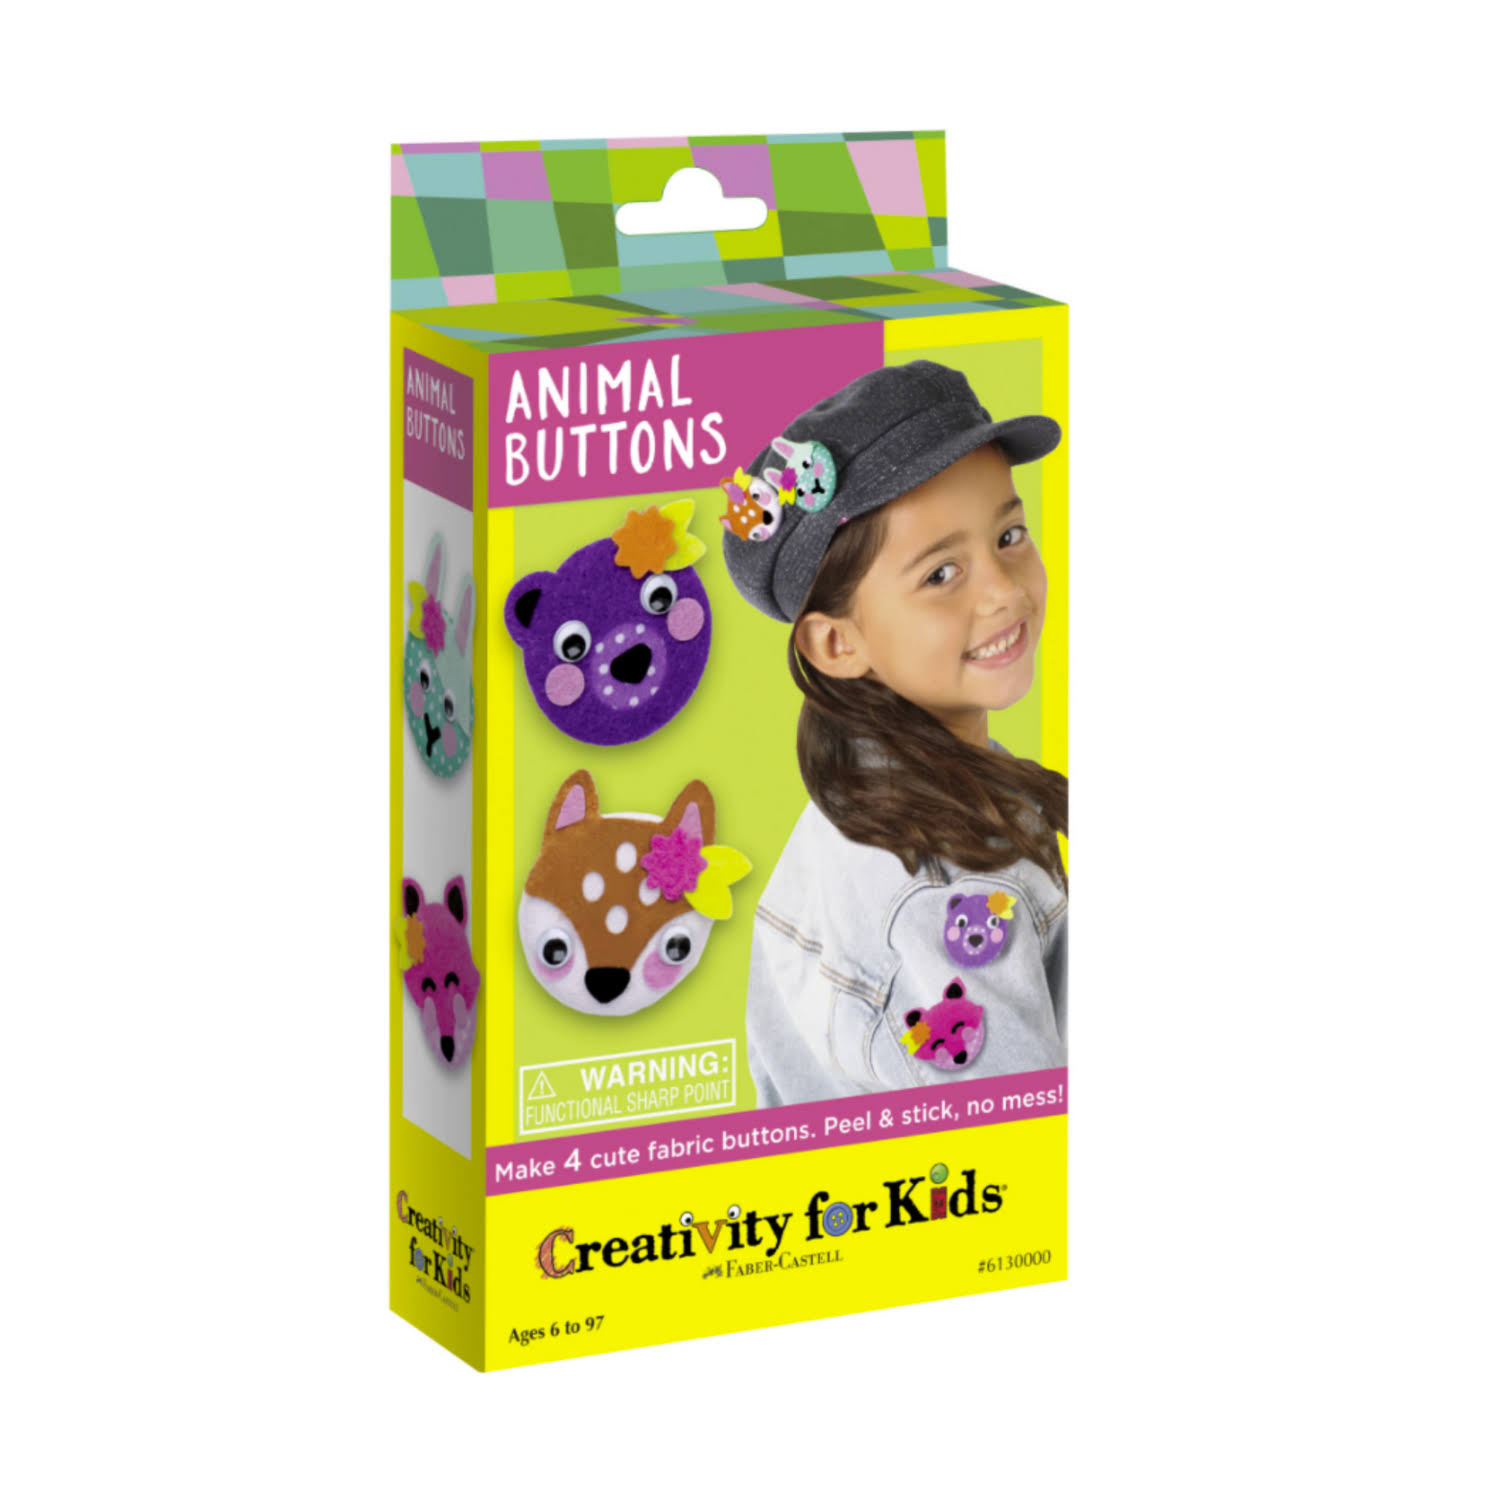 Creativity for Kids- Animal Buttons kit